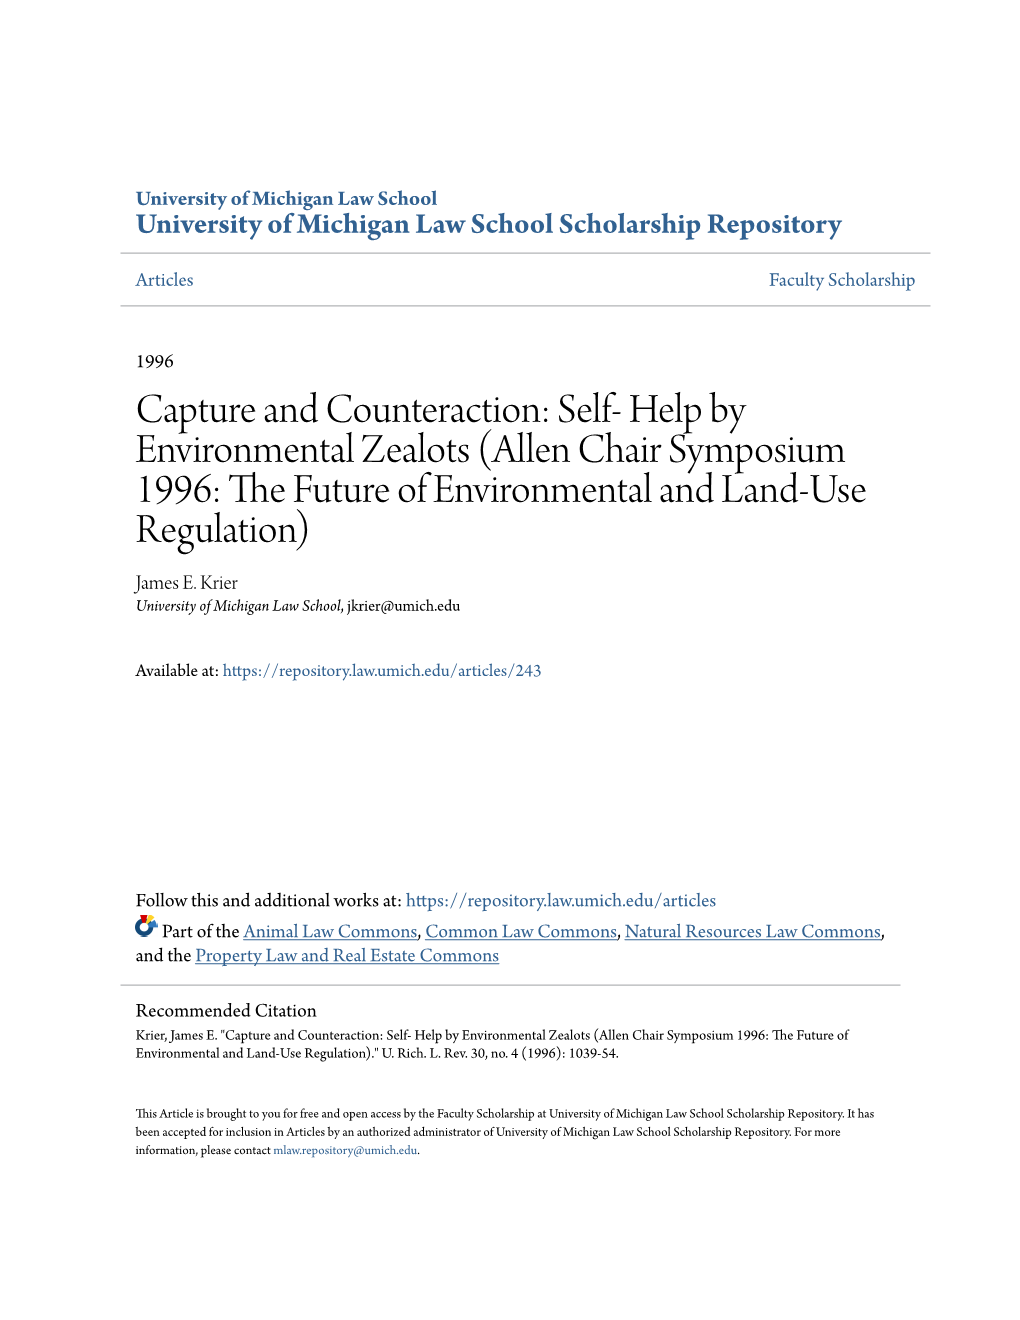 Help by Environmental Zealots (Allen Chair Symposium 1996: the Future